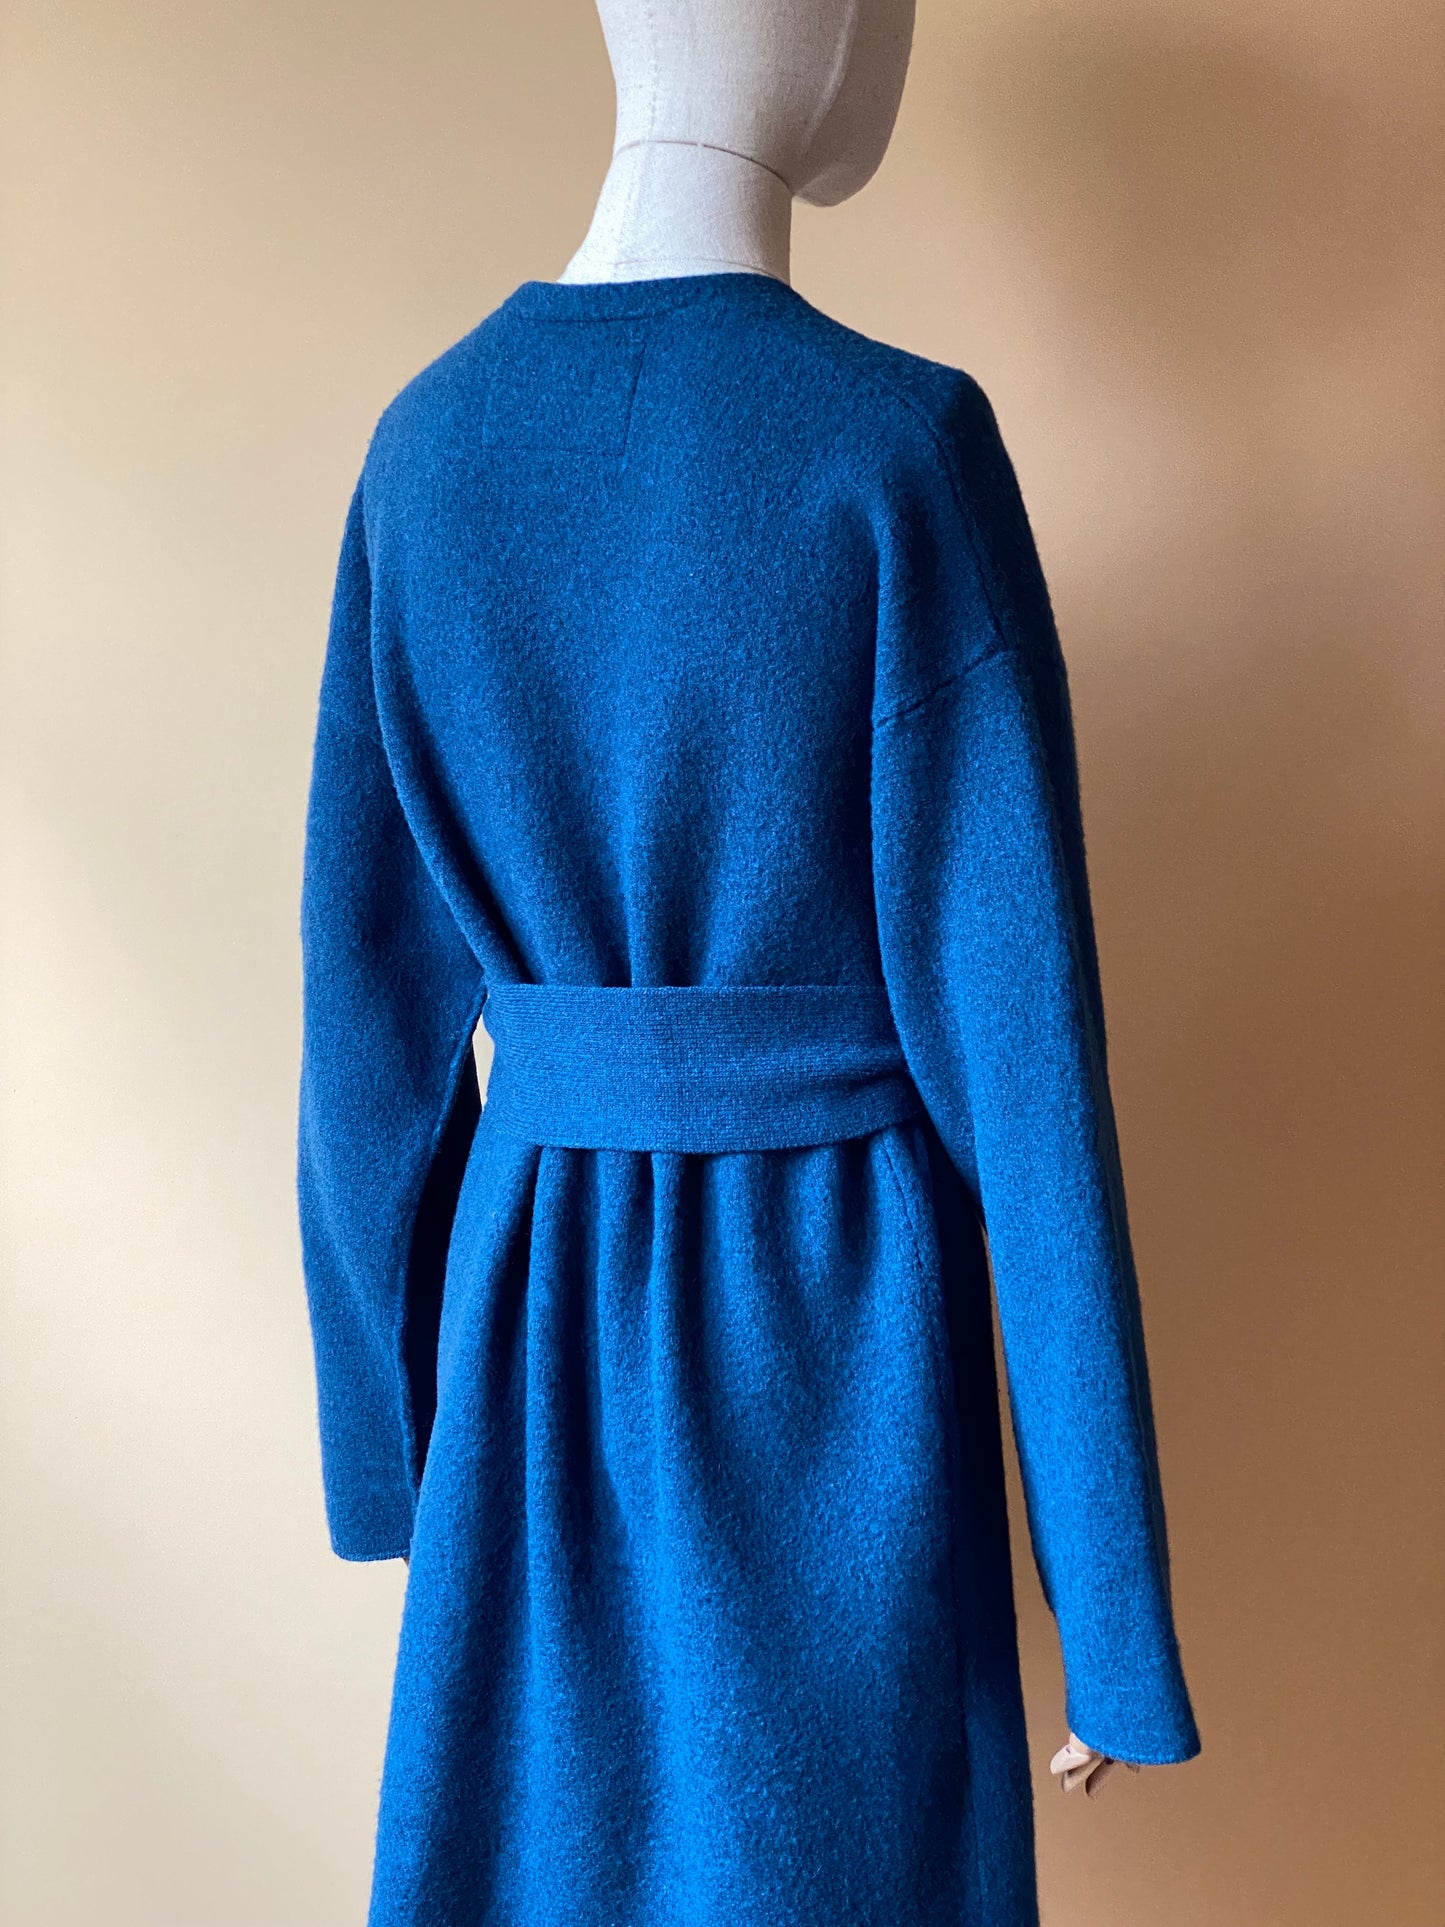 Teal Blue Long Belted Sweater